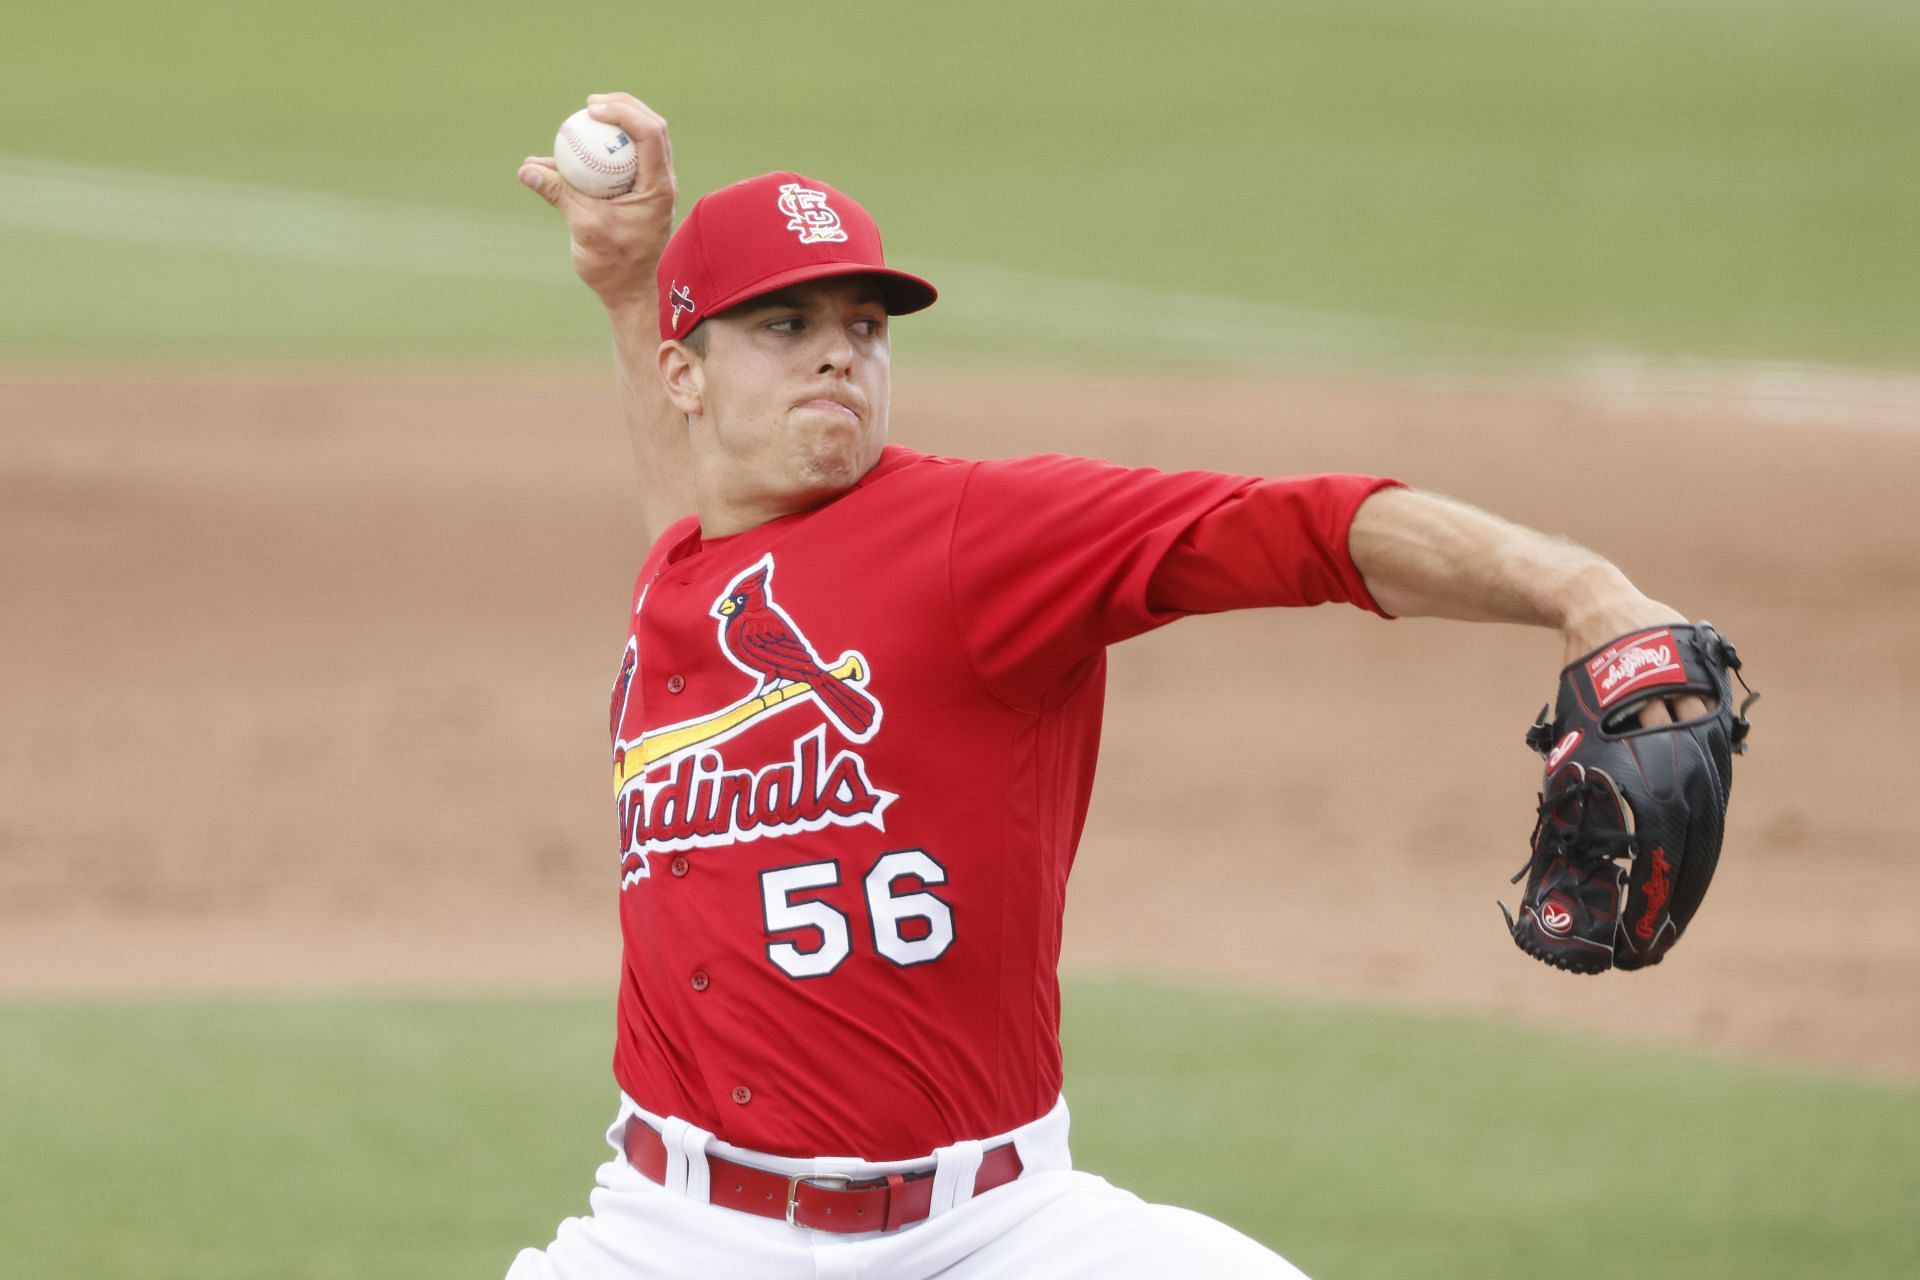 Ryan Helsley of the St. Louis Cardinals delivers a pitch against the Houston Astros.